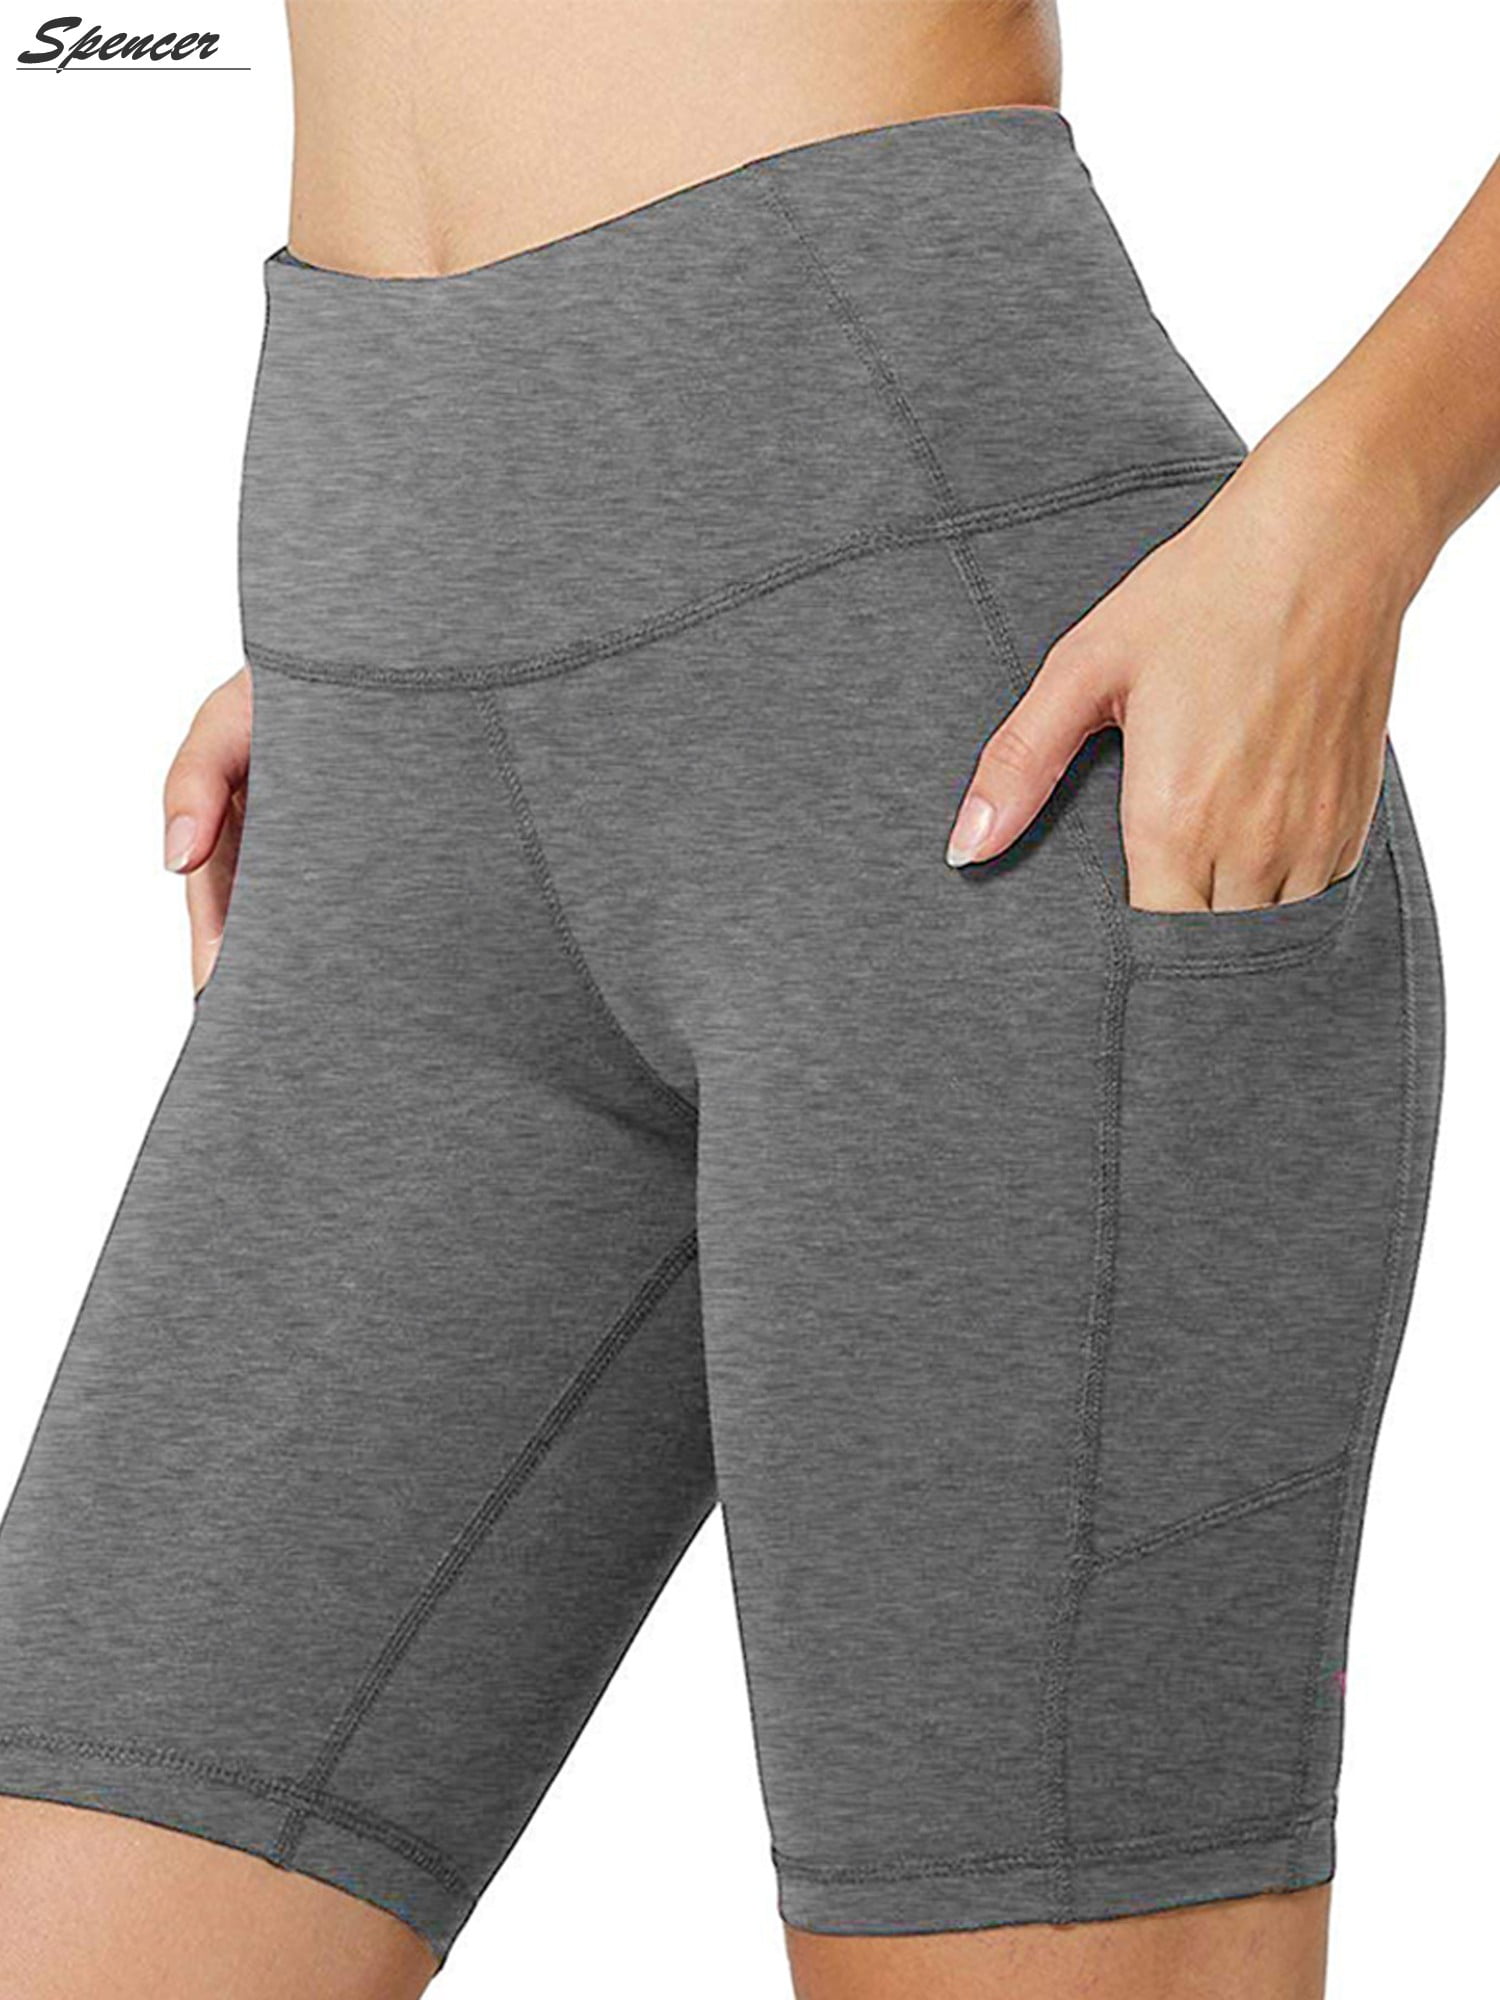 Bravetoshop Womens High Waist Yoga Pants Tummy Control Workout Running Stretch Yoga Leggings for Gym Sport with Pockets